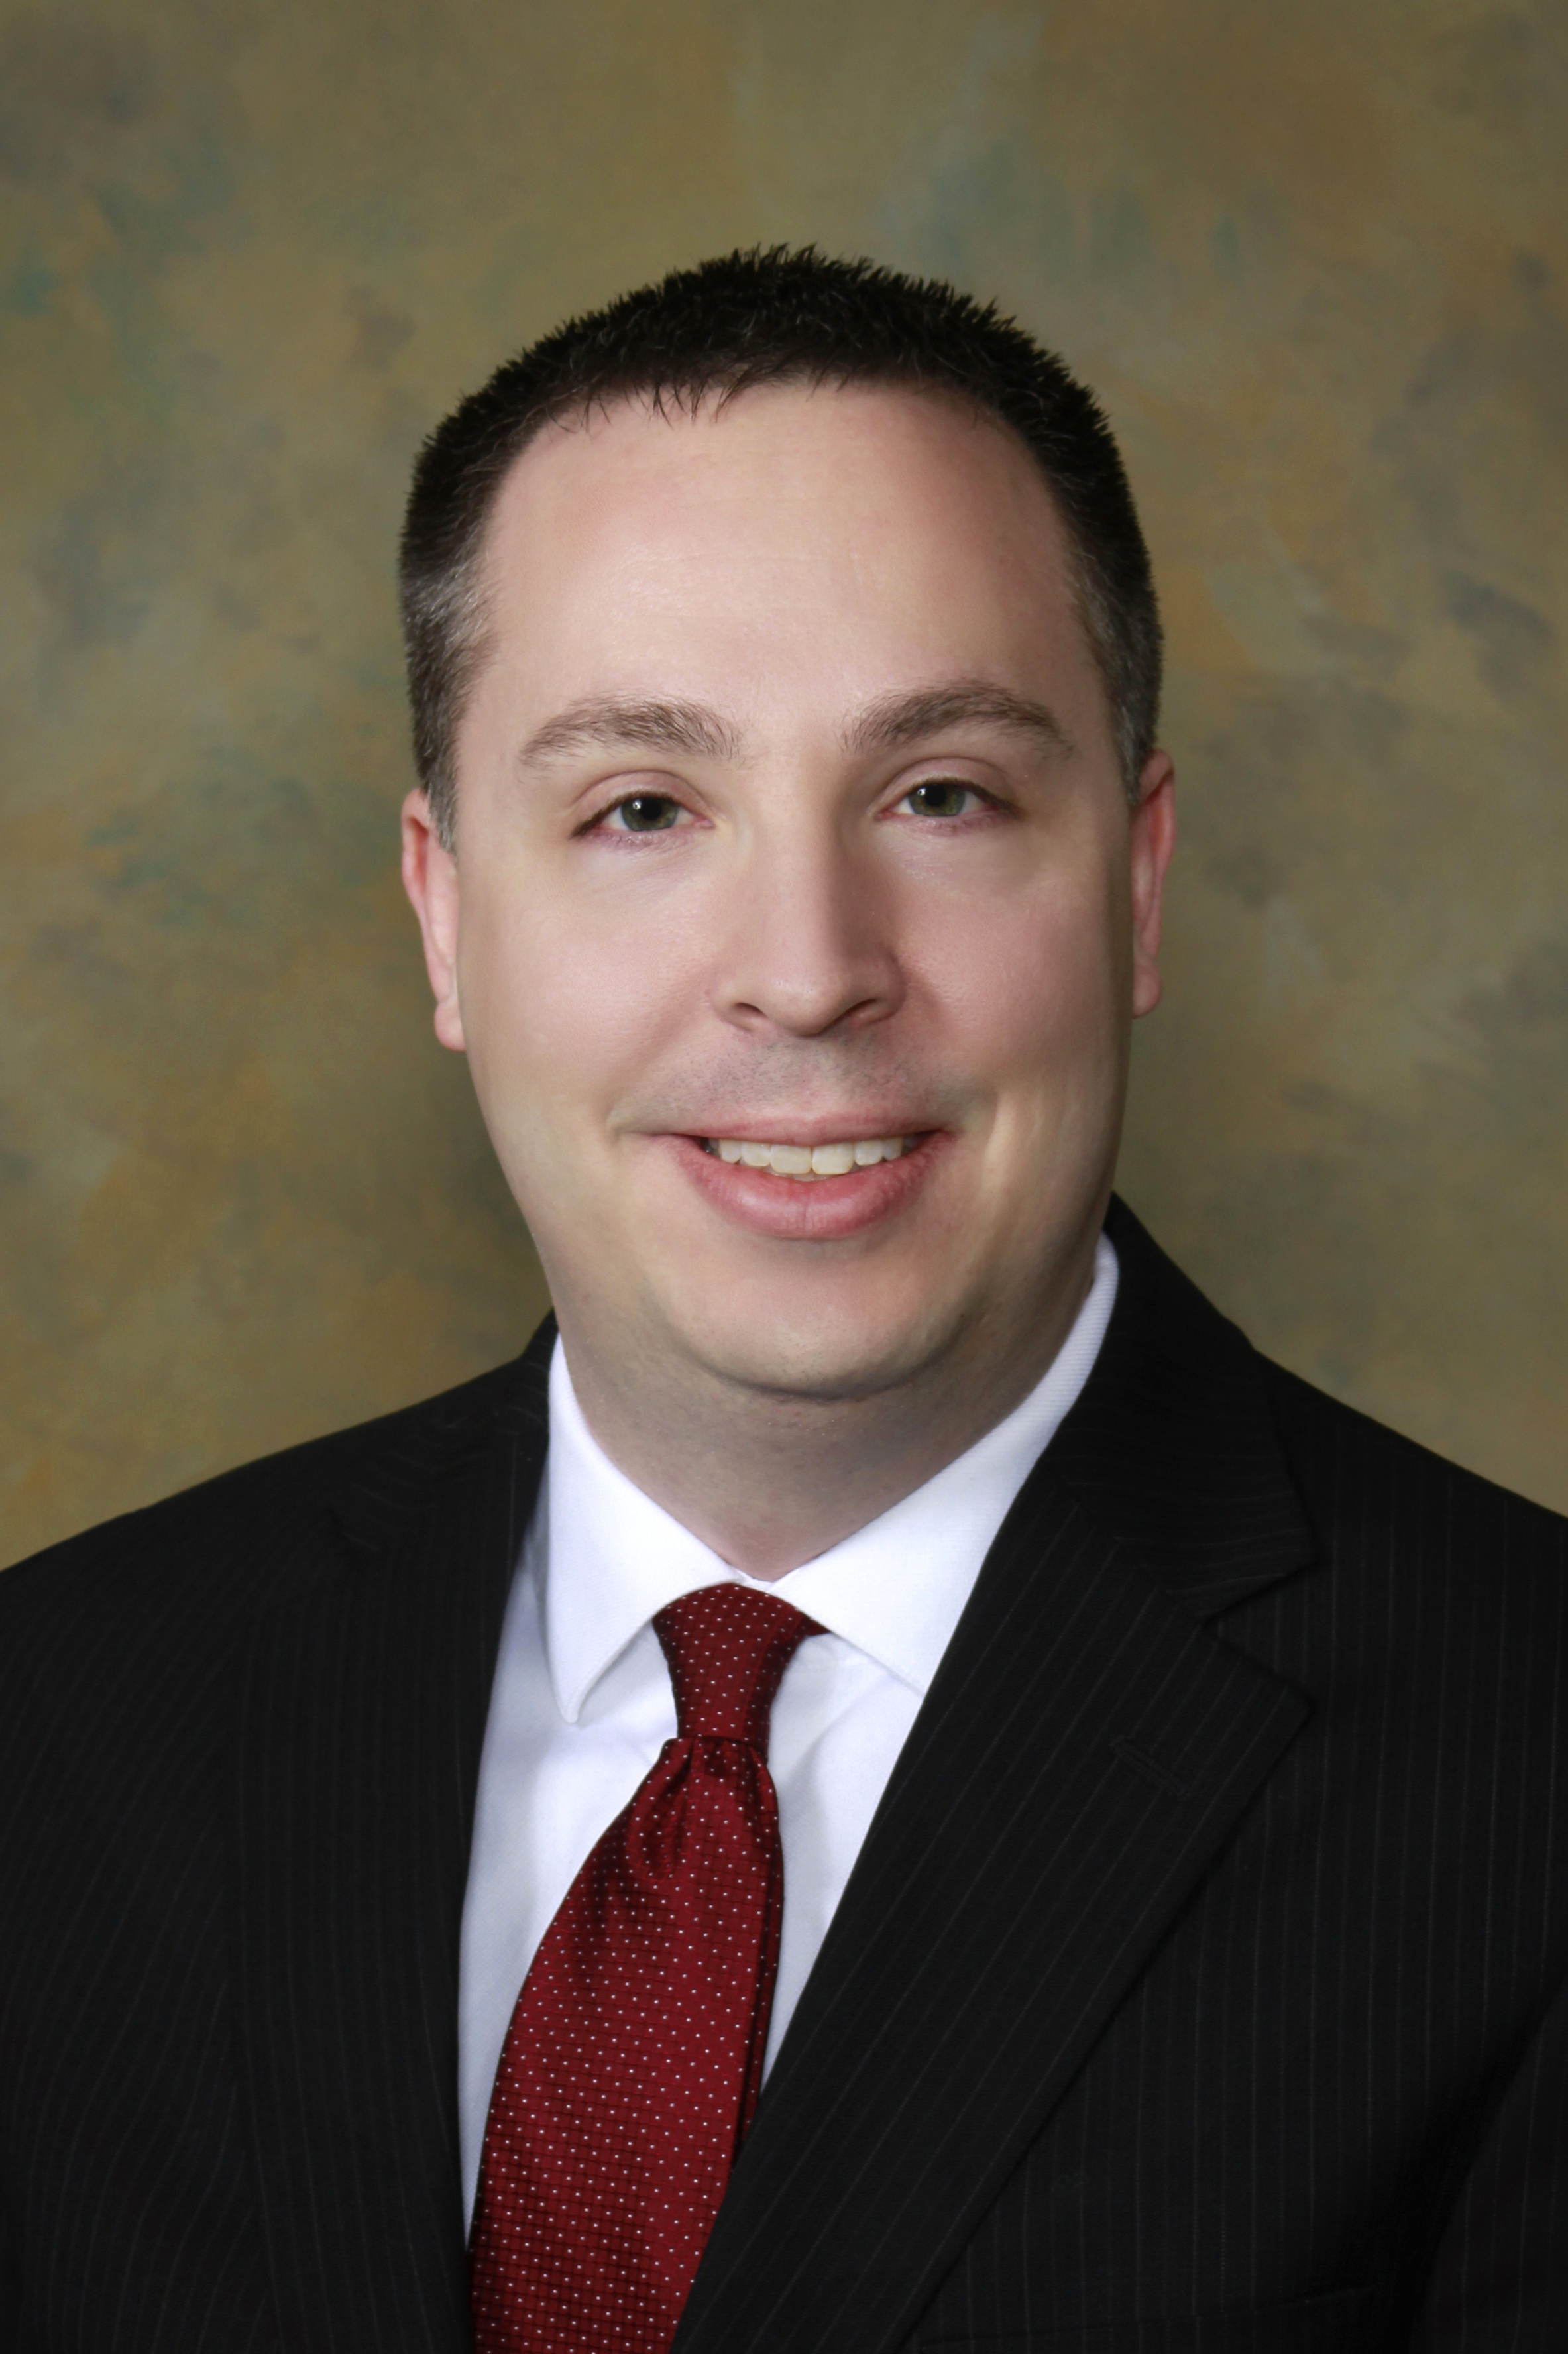 DUI Attorney Andrew Hoverman - Prince Georges County, MD - DUIAttorney.com